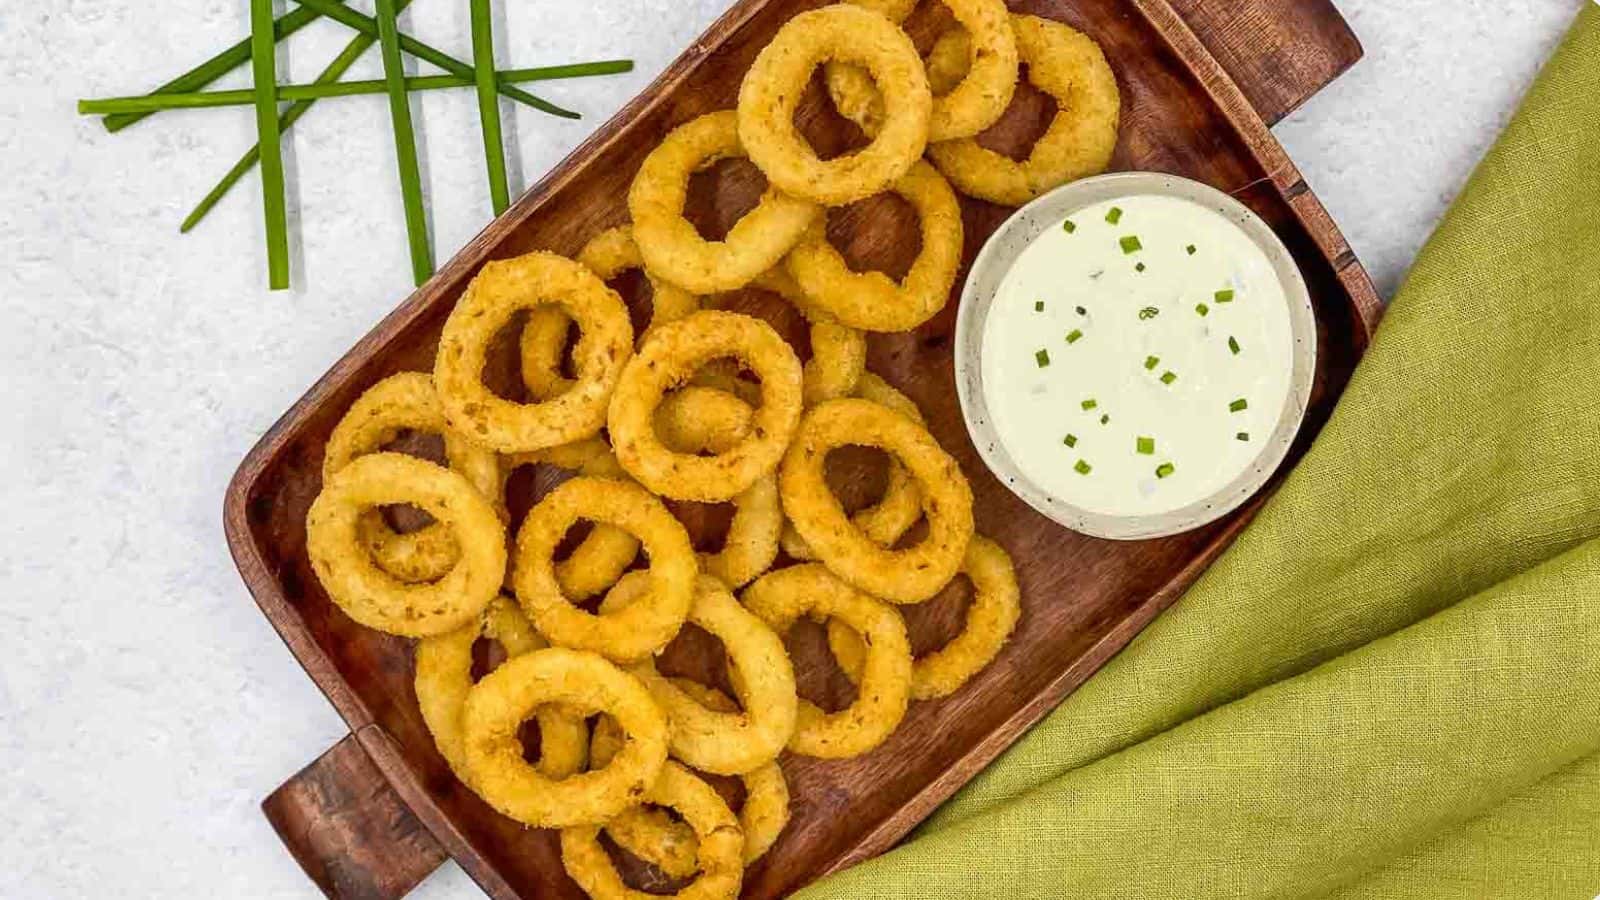 Onion rings on a wooden tray with dipping sauce.